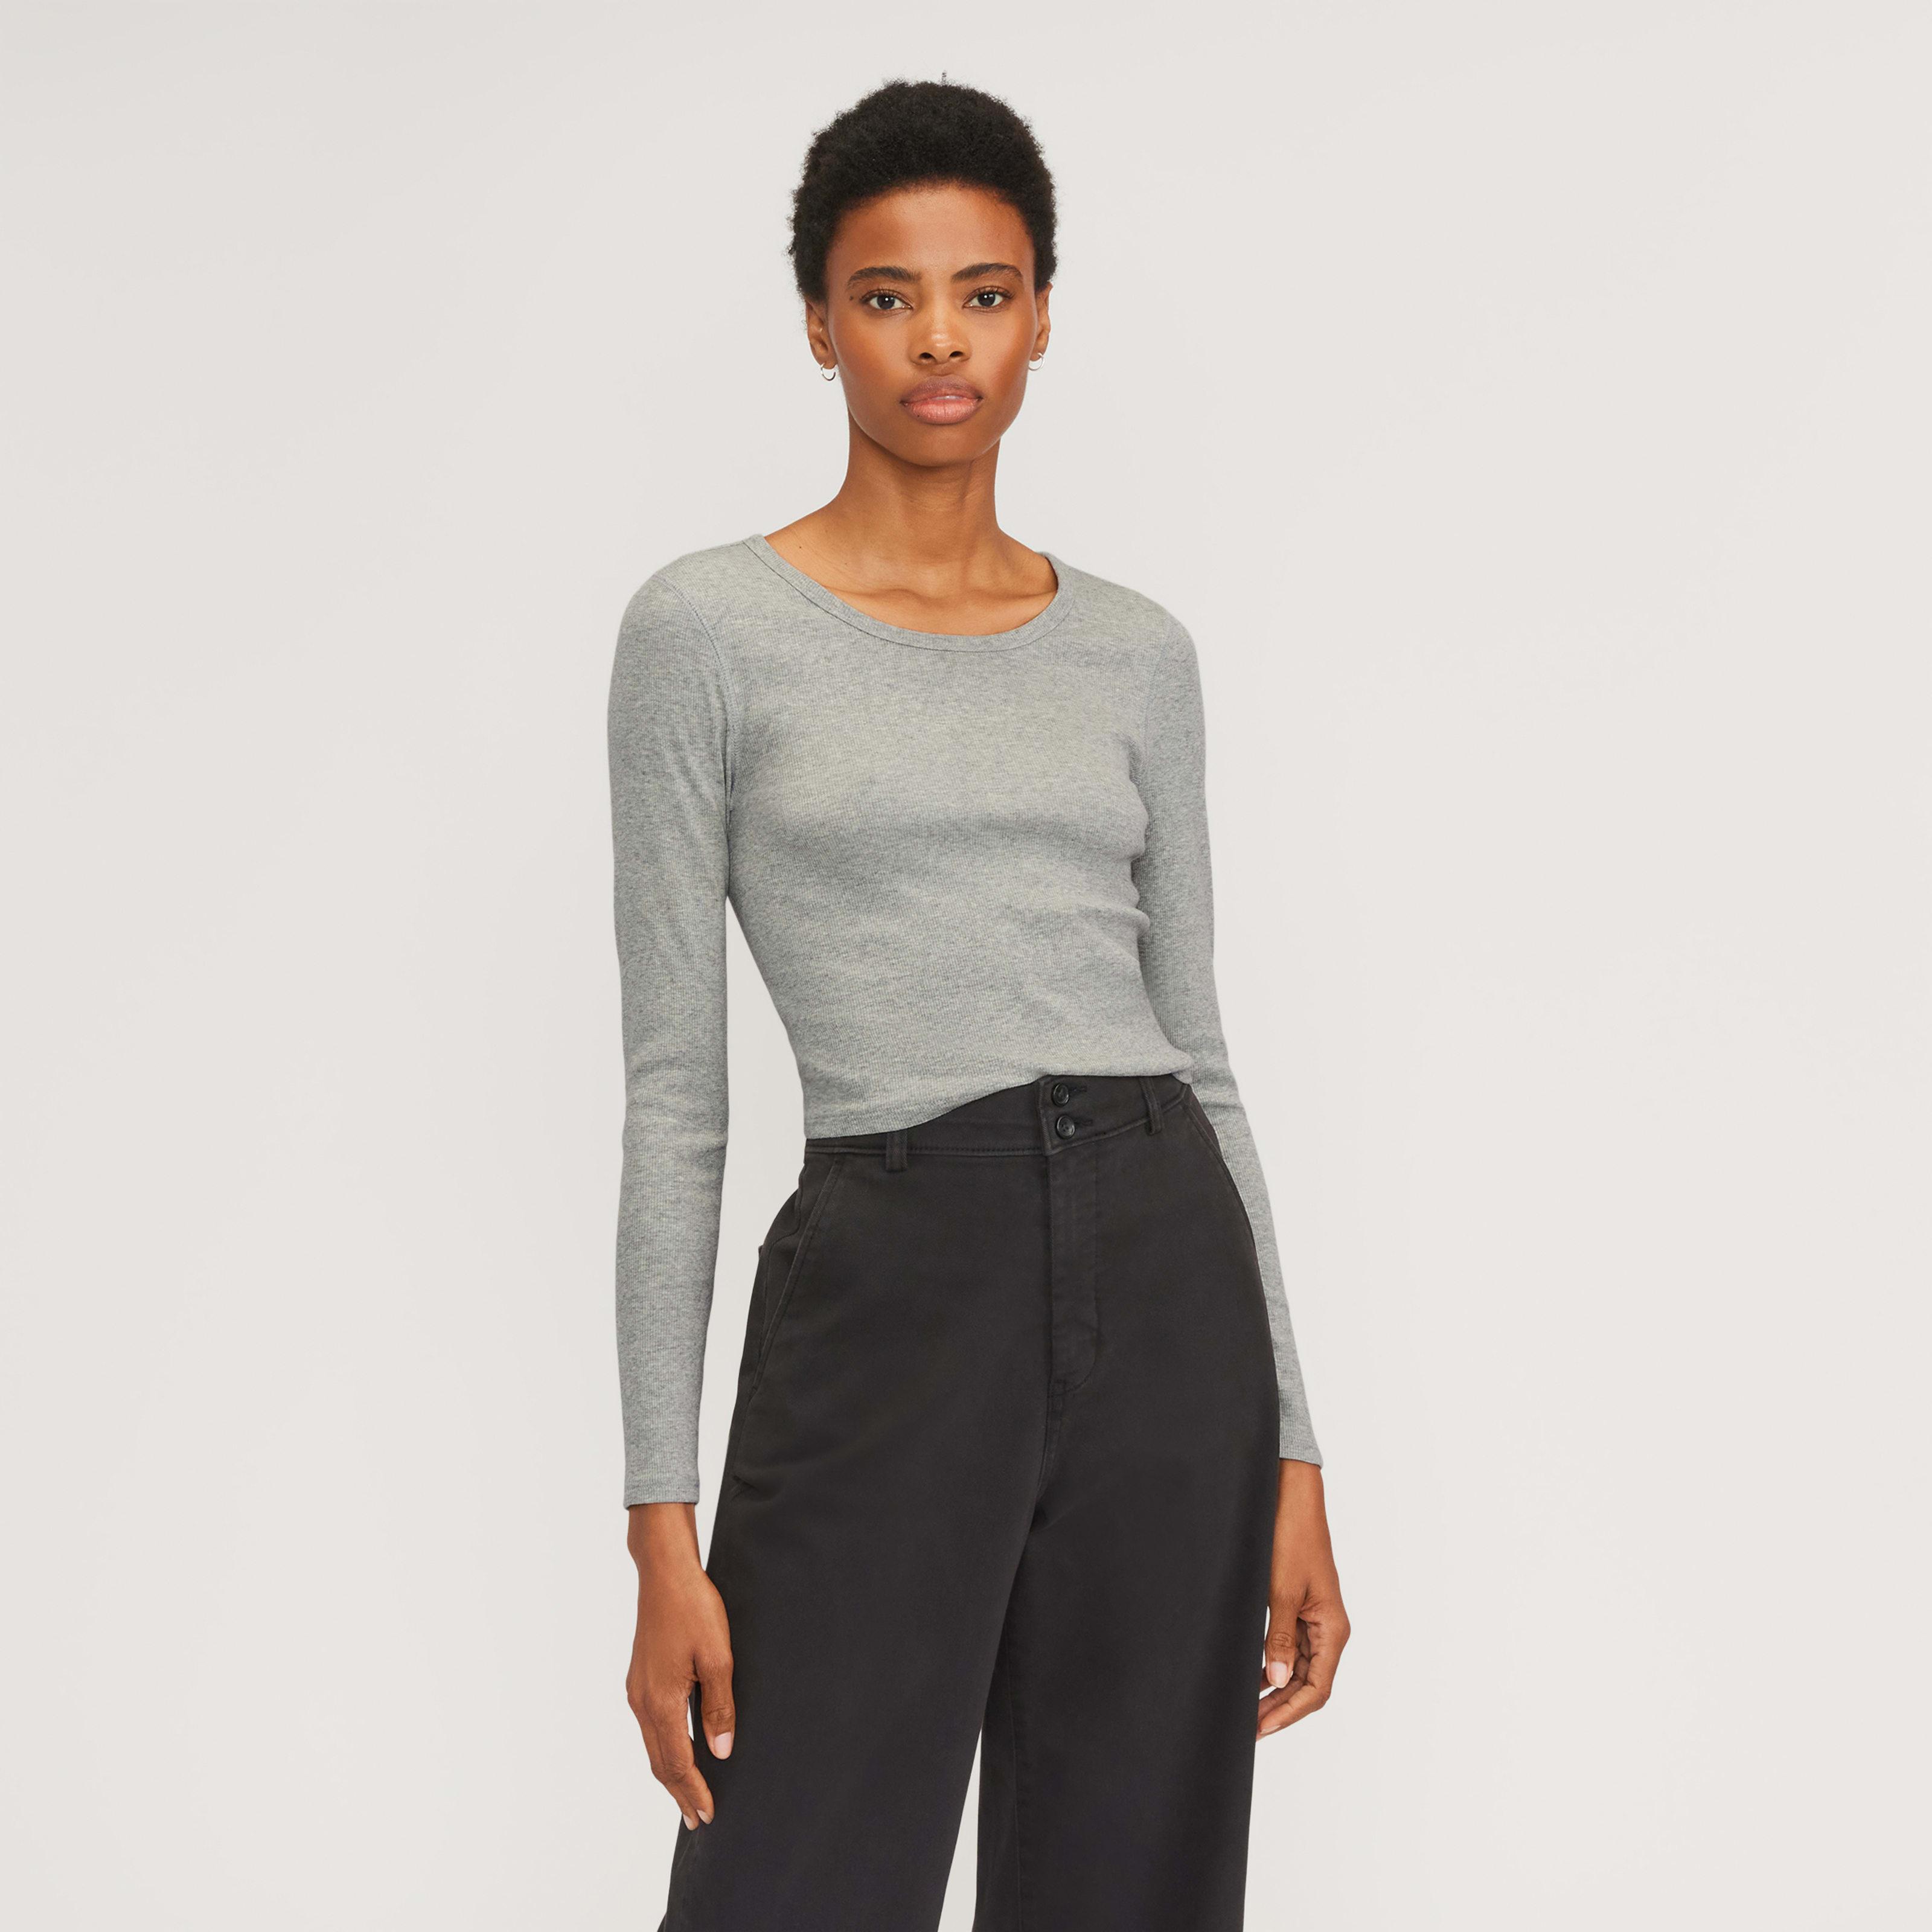 Womens Pima Micro-Rib Cropped Long-Sleeve Crew Sweater by Everlane Product Image